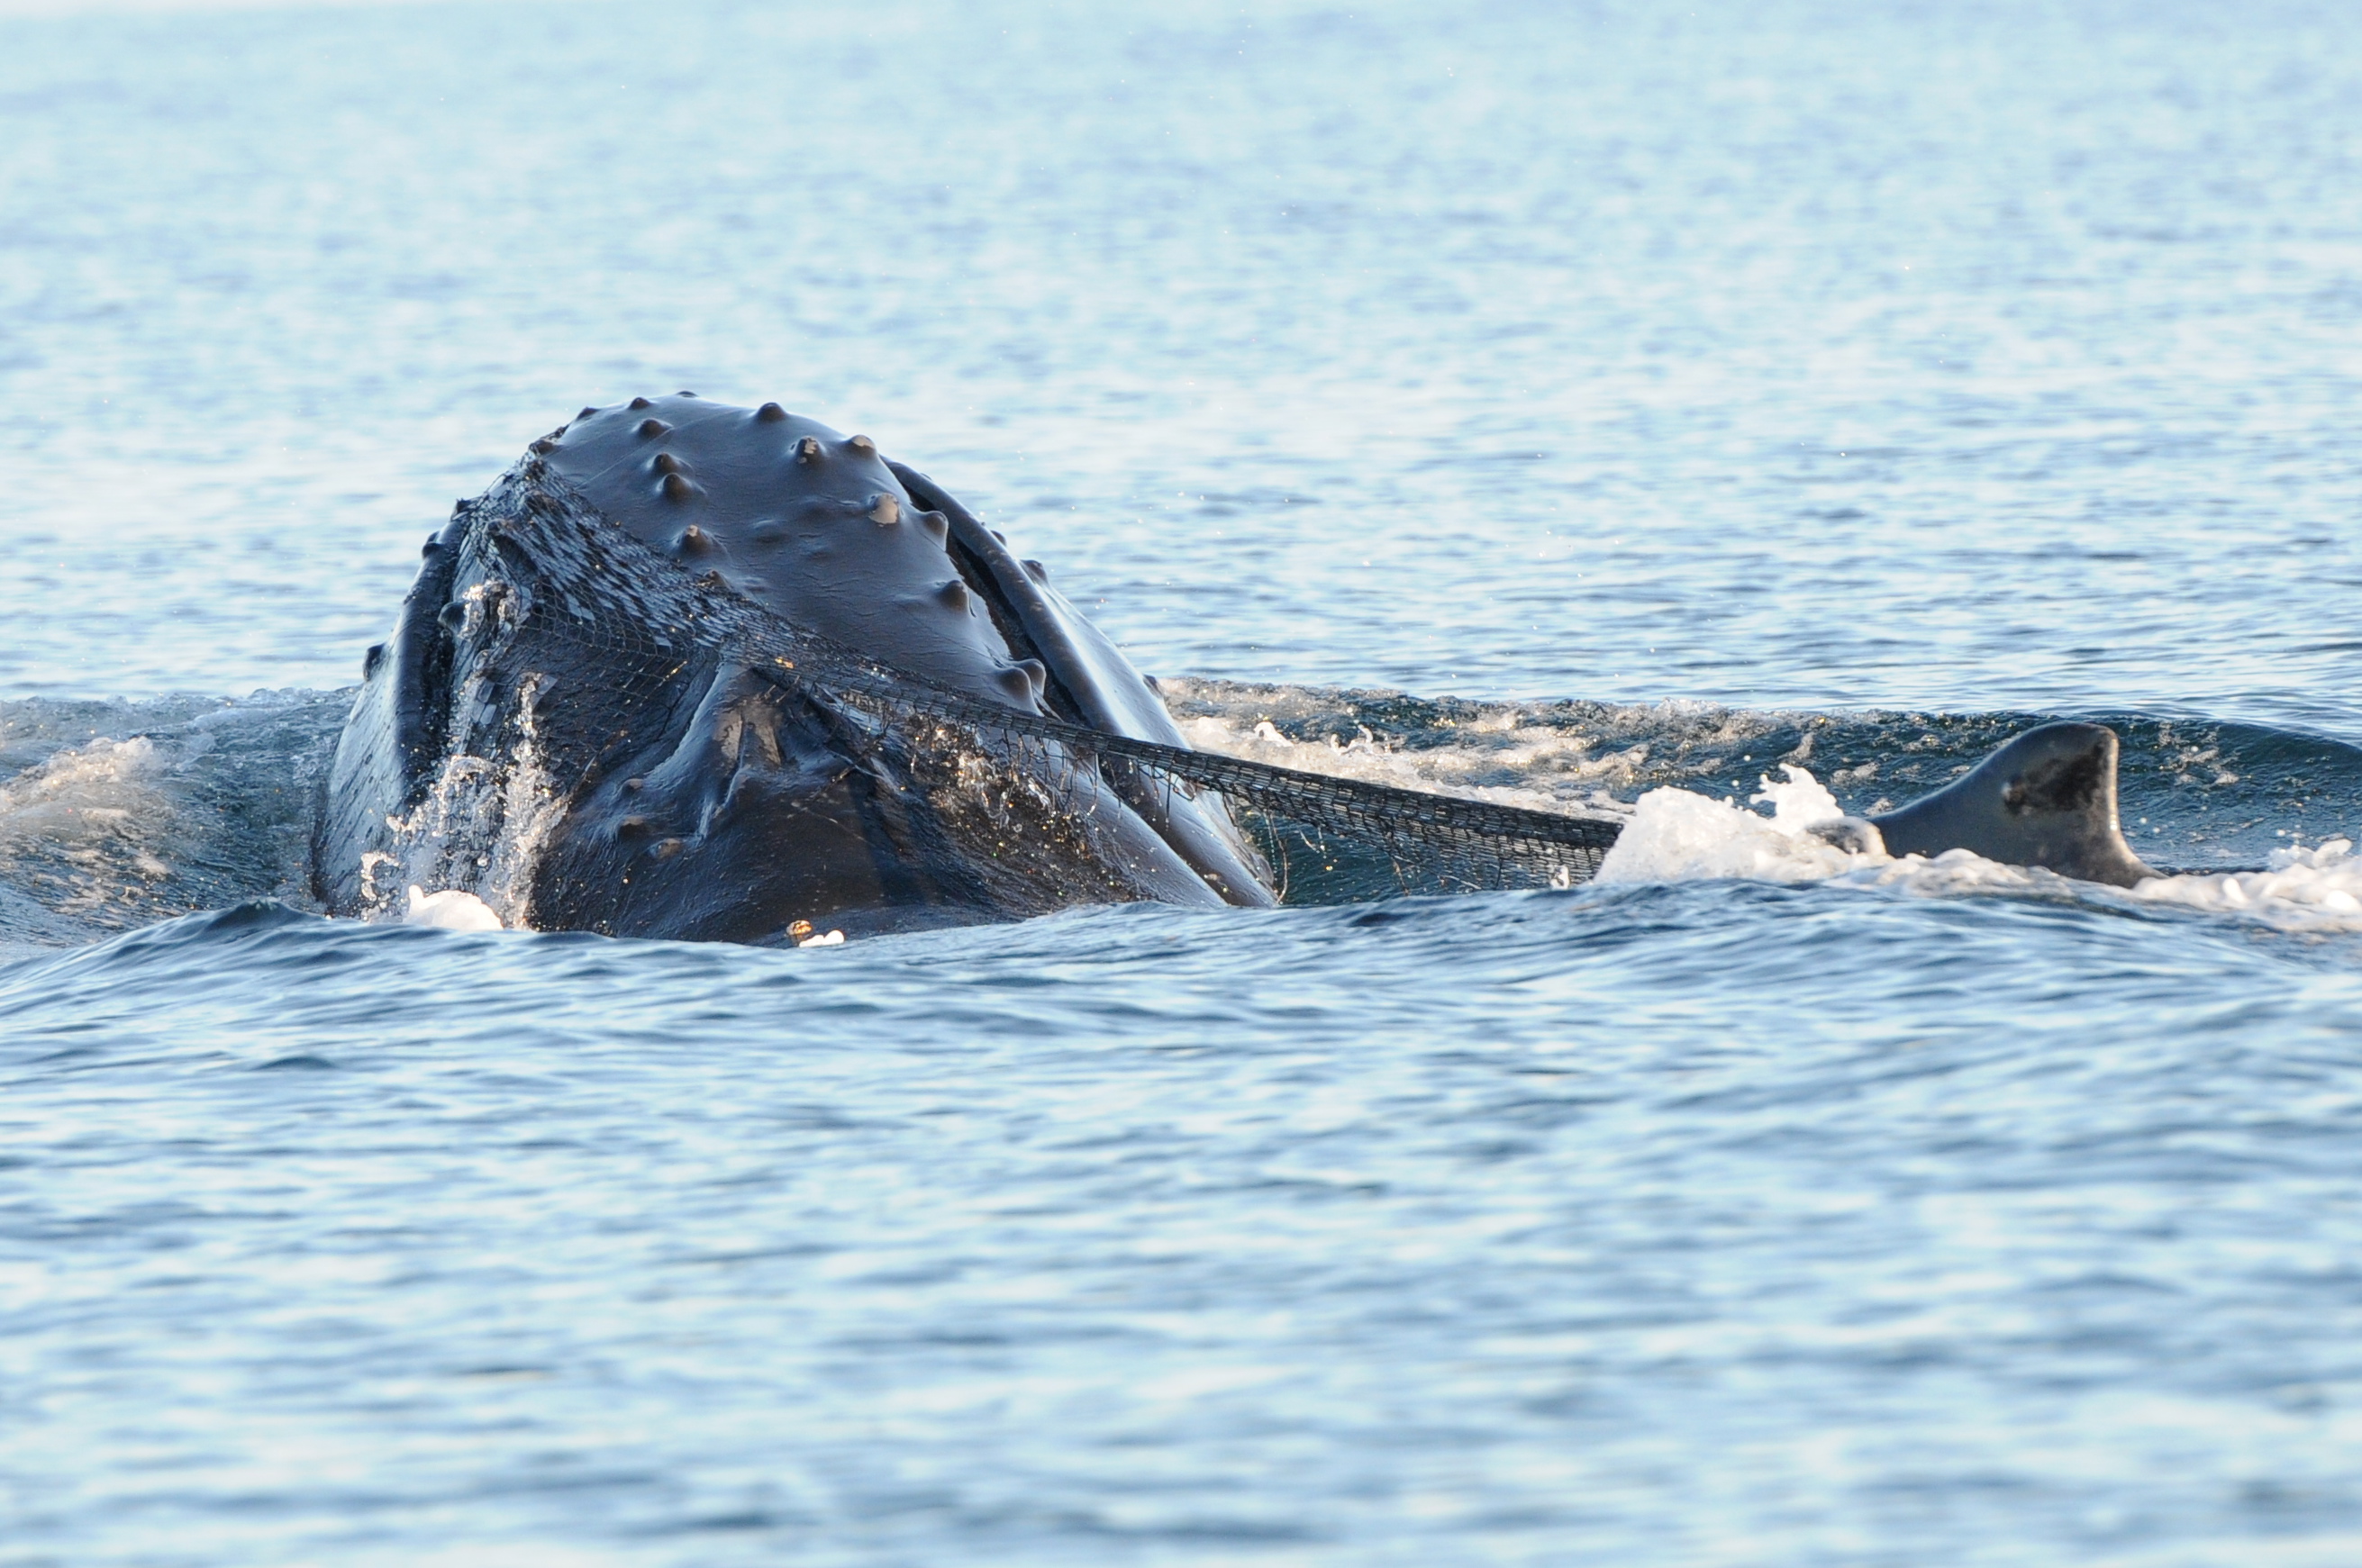 Humpback whale "Cutter", entangled in fishing gear off northern Vancouver Island (Photo by Christie McMillan, MERS)